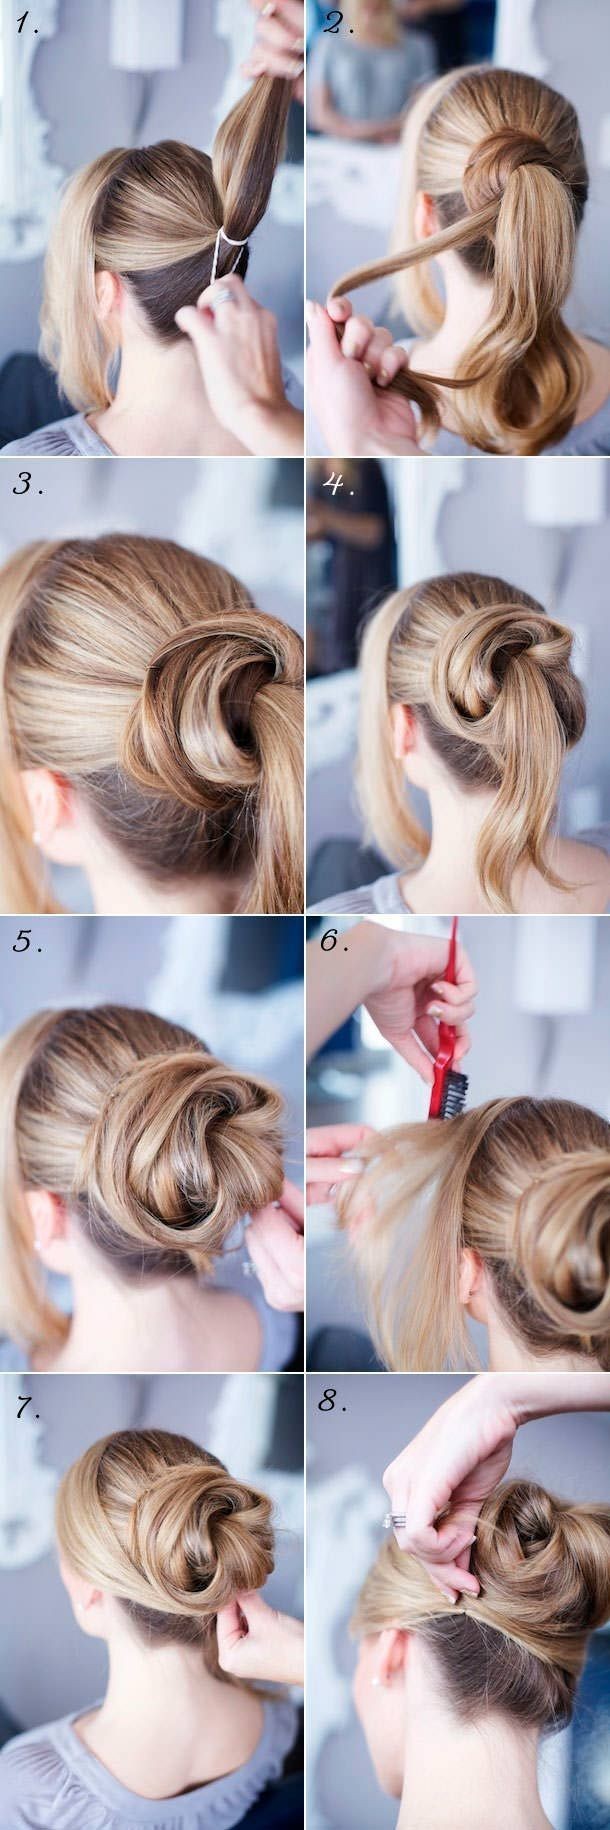 14 Easy Step By Step Updo Hairstyles Tutorials Pretty